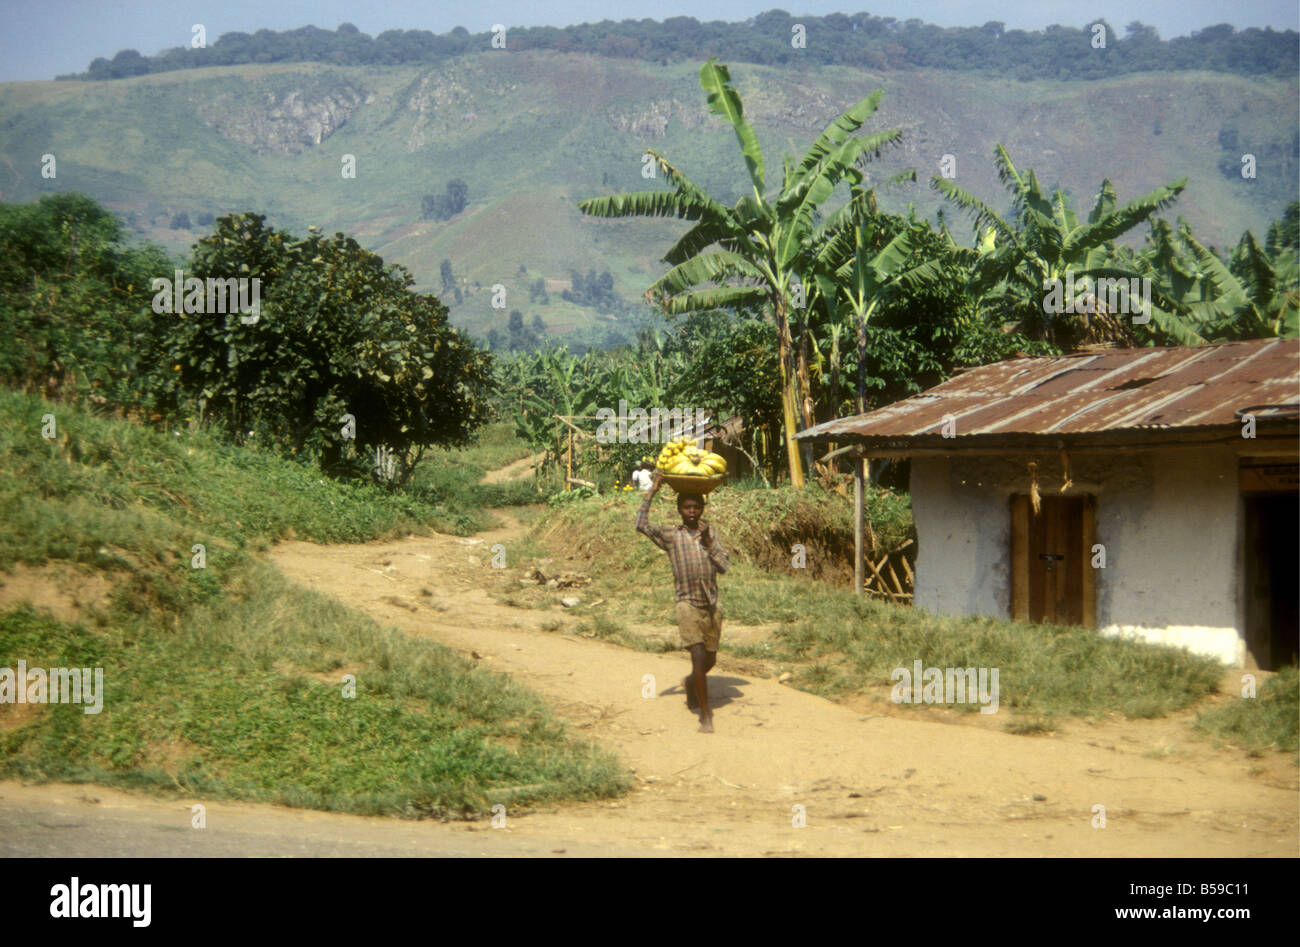 Young boy carrying basket of bananas on his head South West Uganda Stock Photo